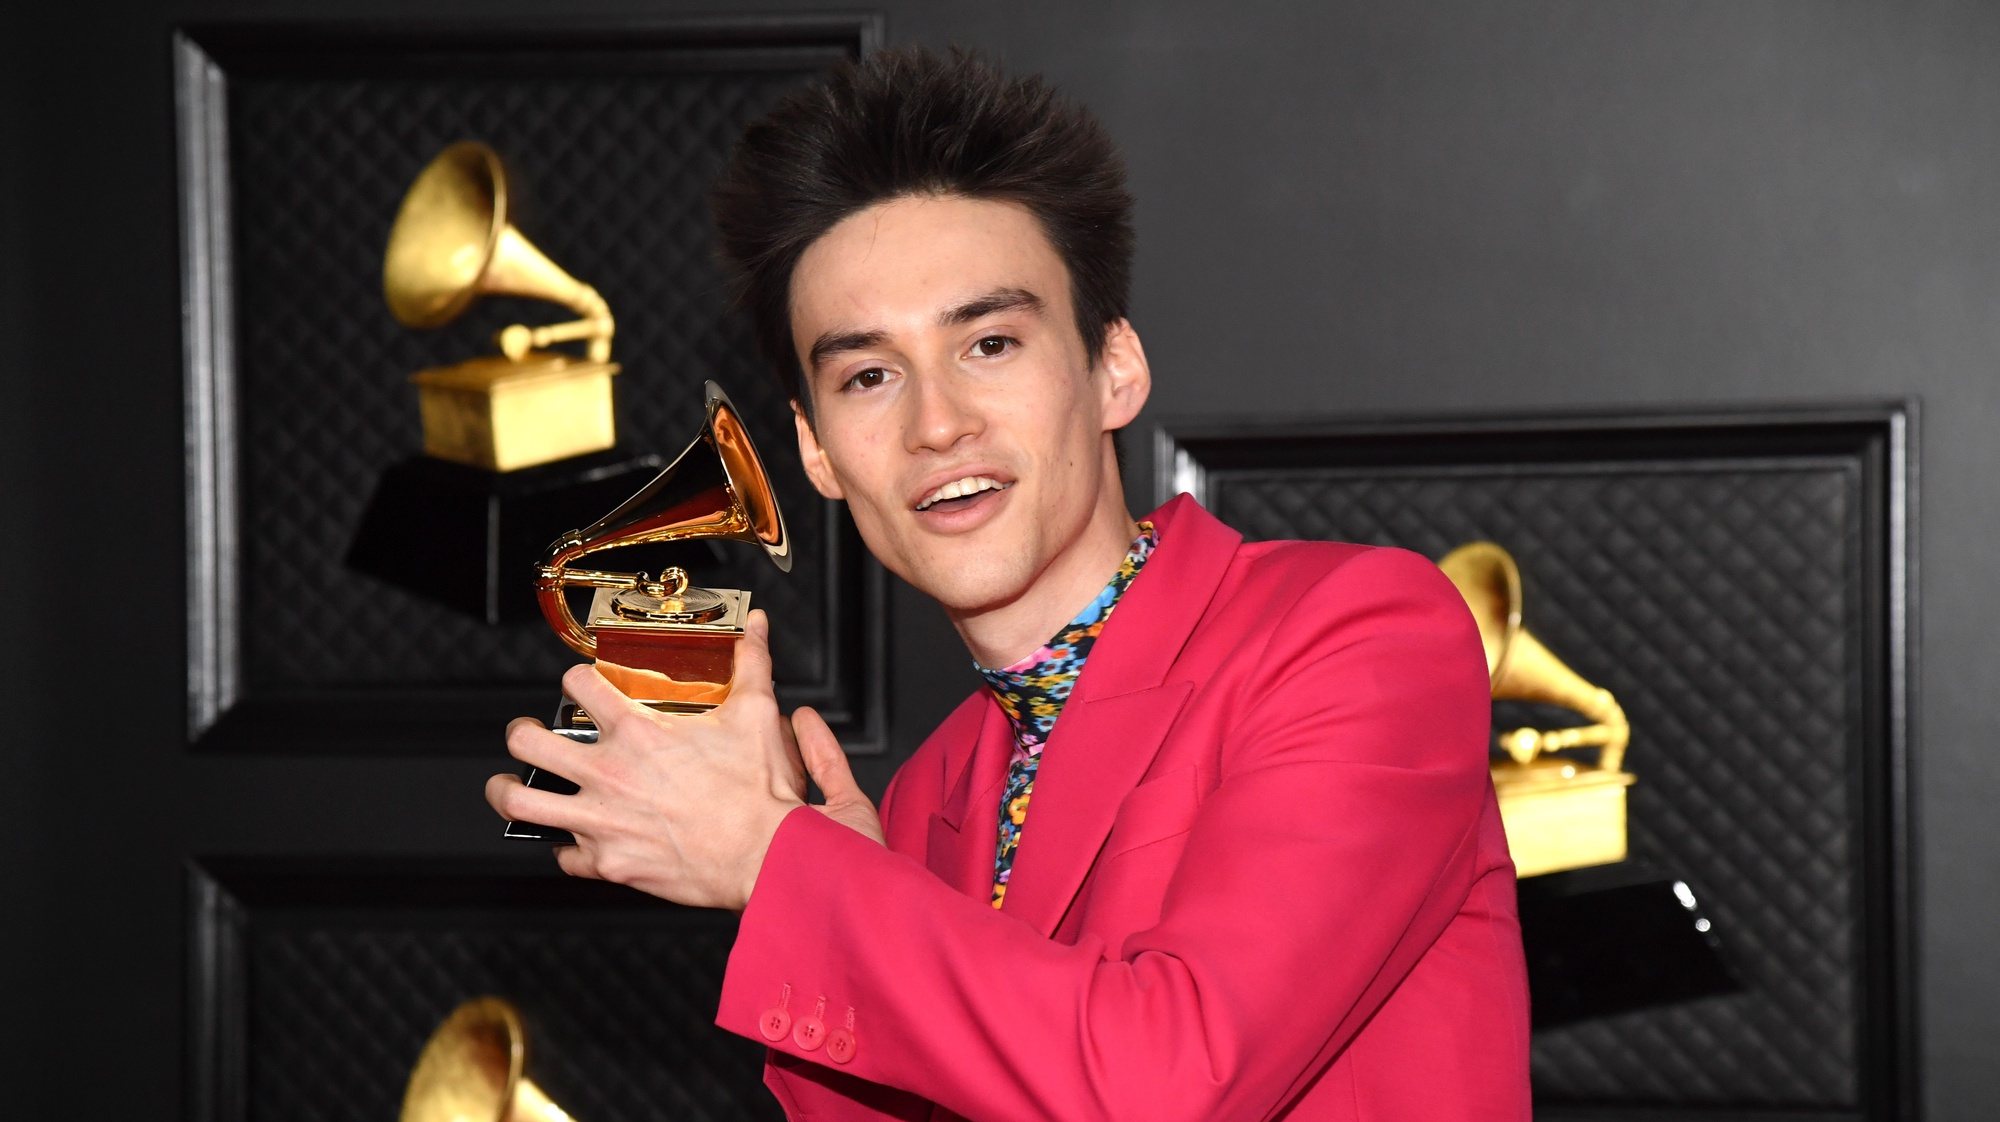 epa09075407 A handout photo made available by The Recording Academy shows Jacob Collier, winner of the Best Arrangement, Instruments and Vocals award for &#039;He Won&#039;t Hold You,&#039; posing in the press room during the 63rd Annual Grammy Awards ceremony at the Los Angeles Convention Center, in Los Angeles, California, USA, 14 March 2021.  EPA/KEVIN MAZUR / HANDOUT ATTENTION EDITORS: IMAGE TO BE USED ONLY IN RELATION TO THE STATED EVENT / HANDOUT EDITORIAL USE ONLY/NO SALES/NO ARCHIVES